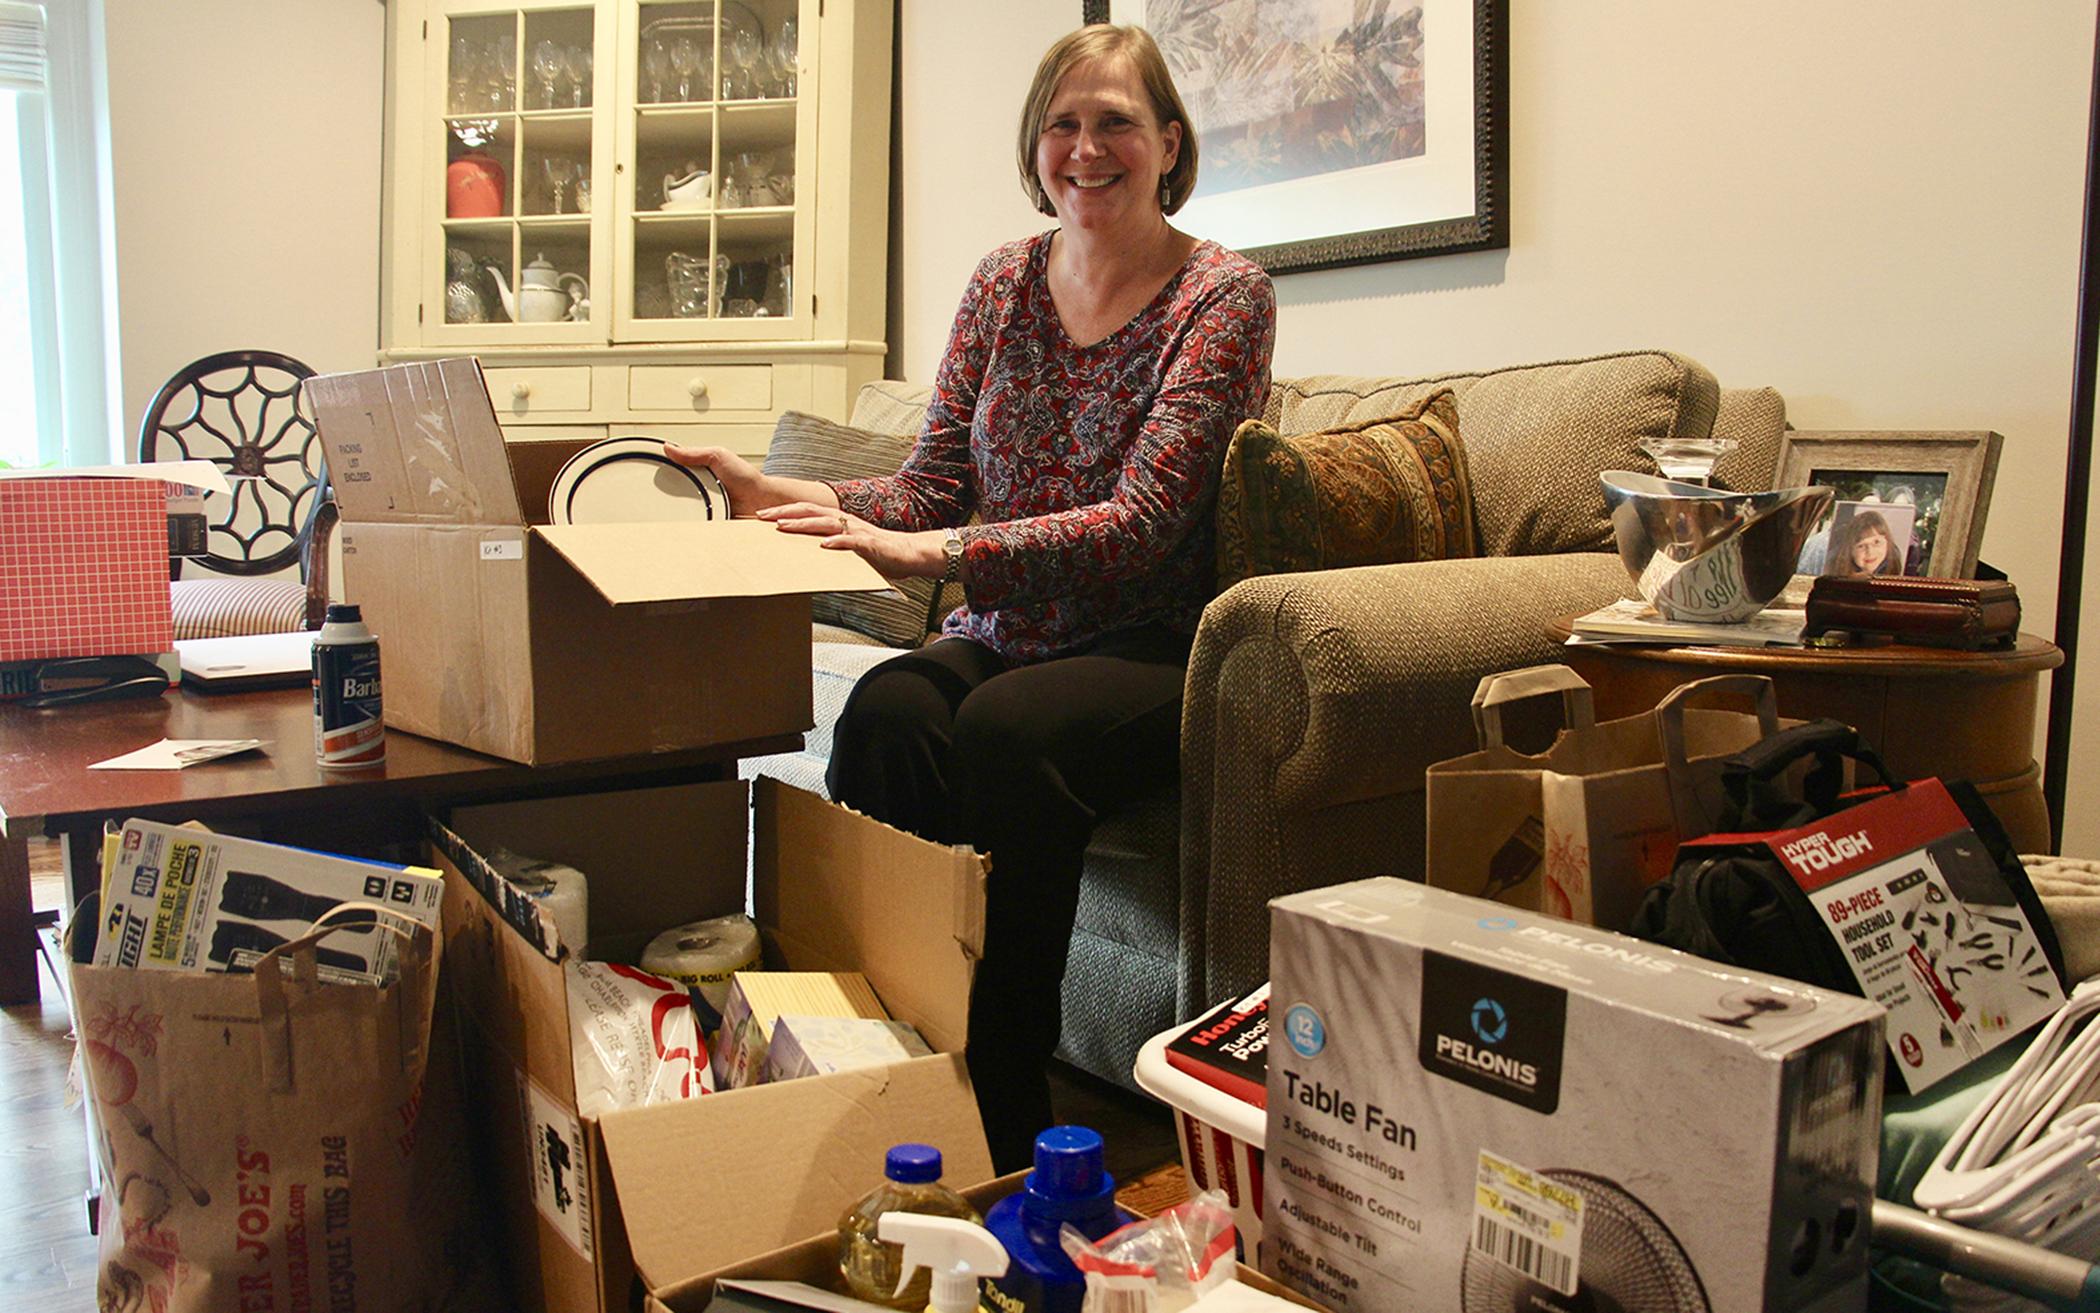 Amy Treier, at her home in the Chicago suburbs, is helping to store donations for World Relief welcome kits collected by members of Immanuel Presbyterian Church in Warrenville, Ill.